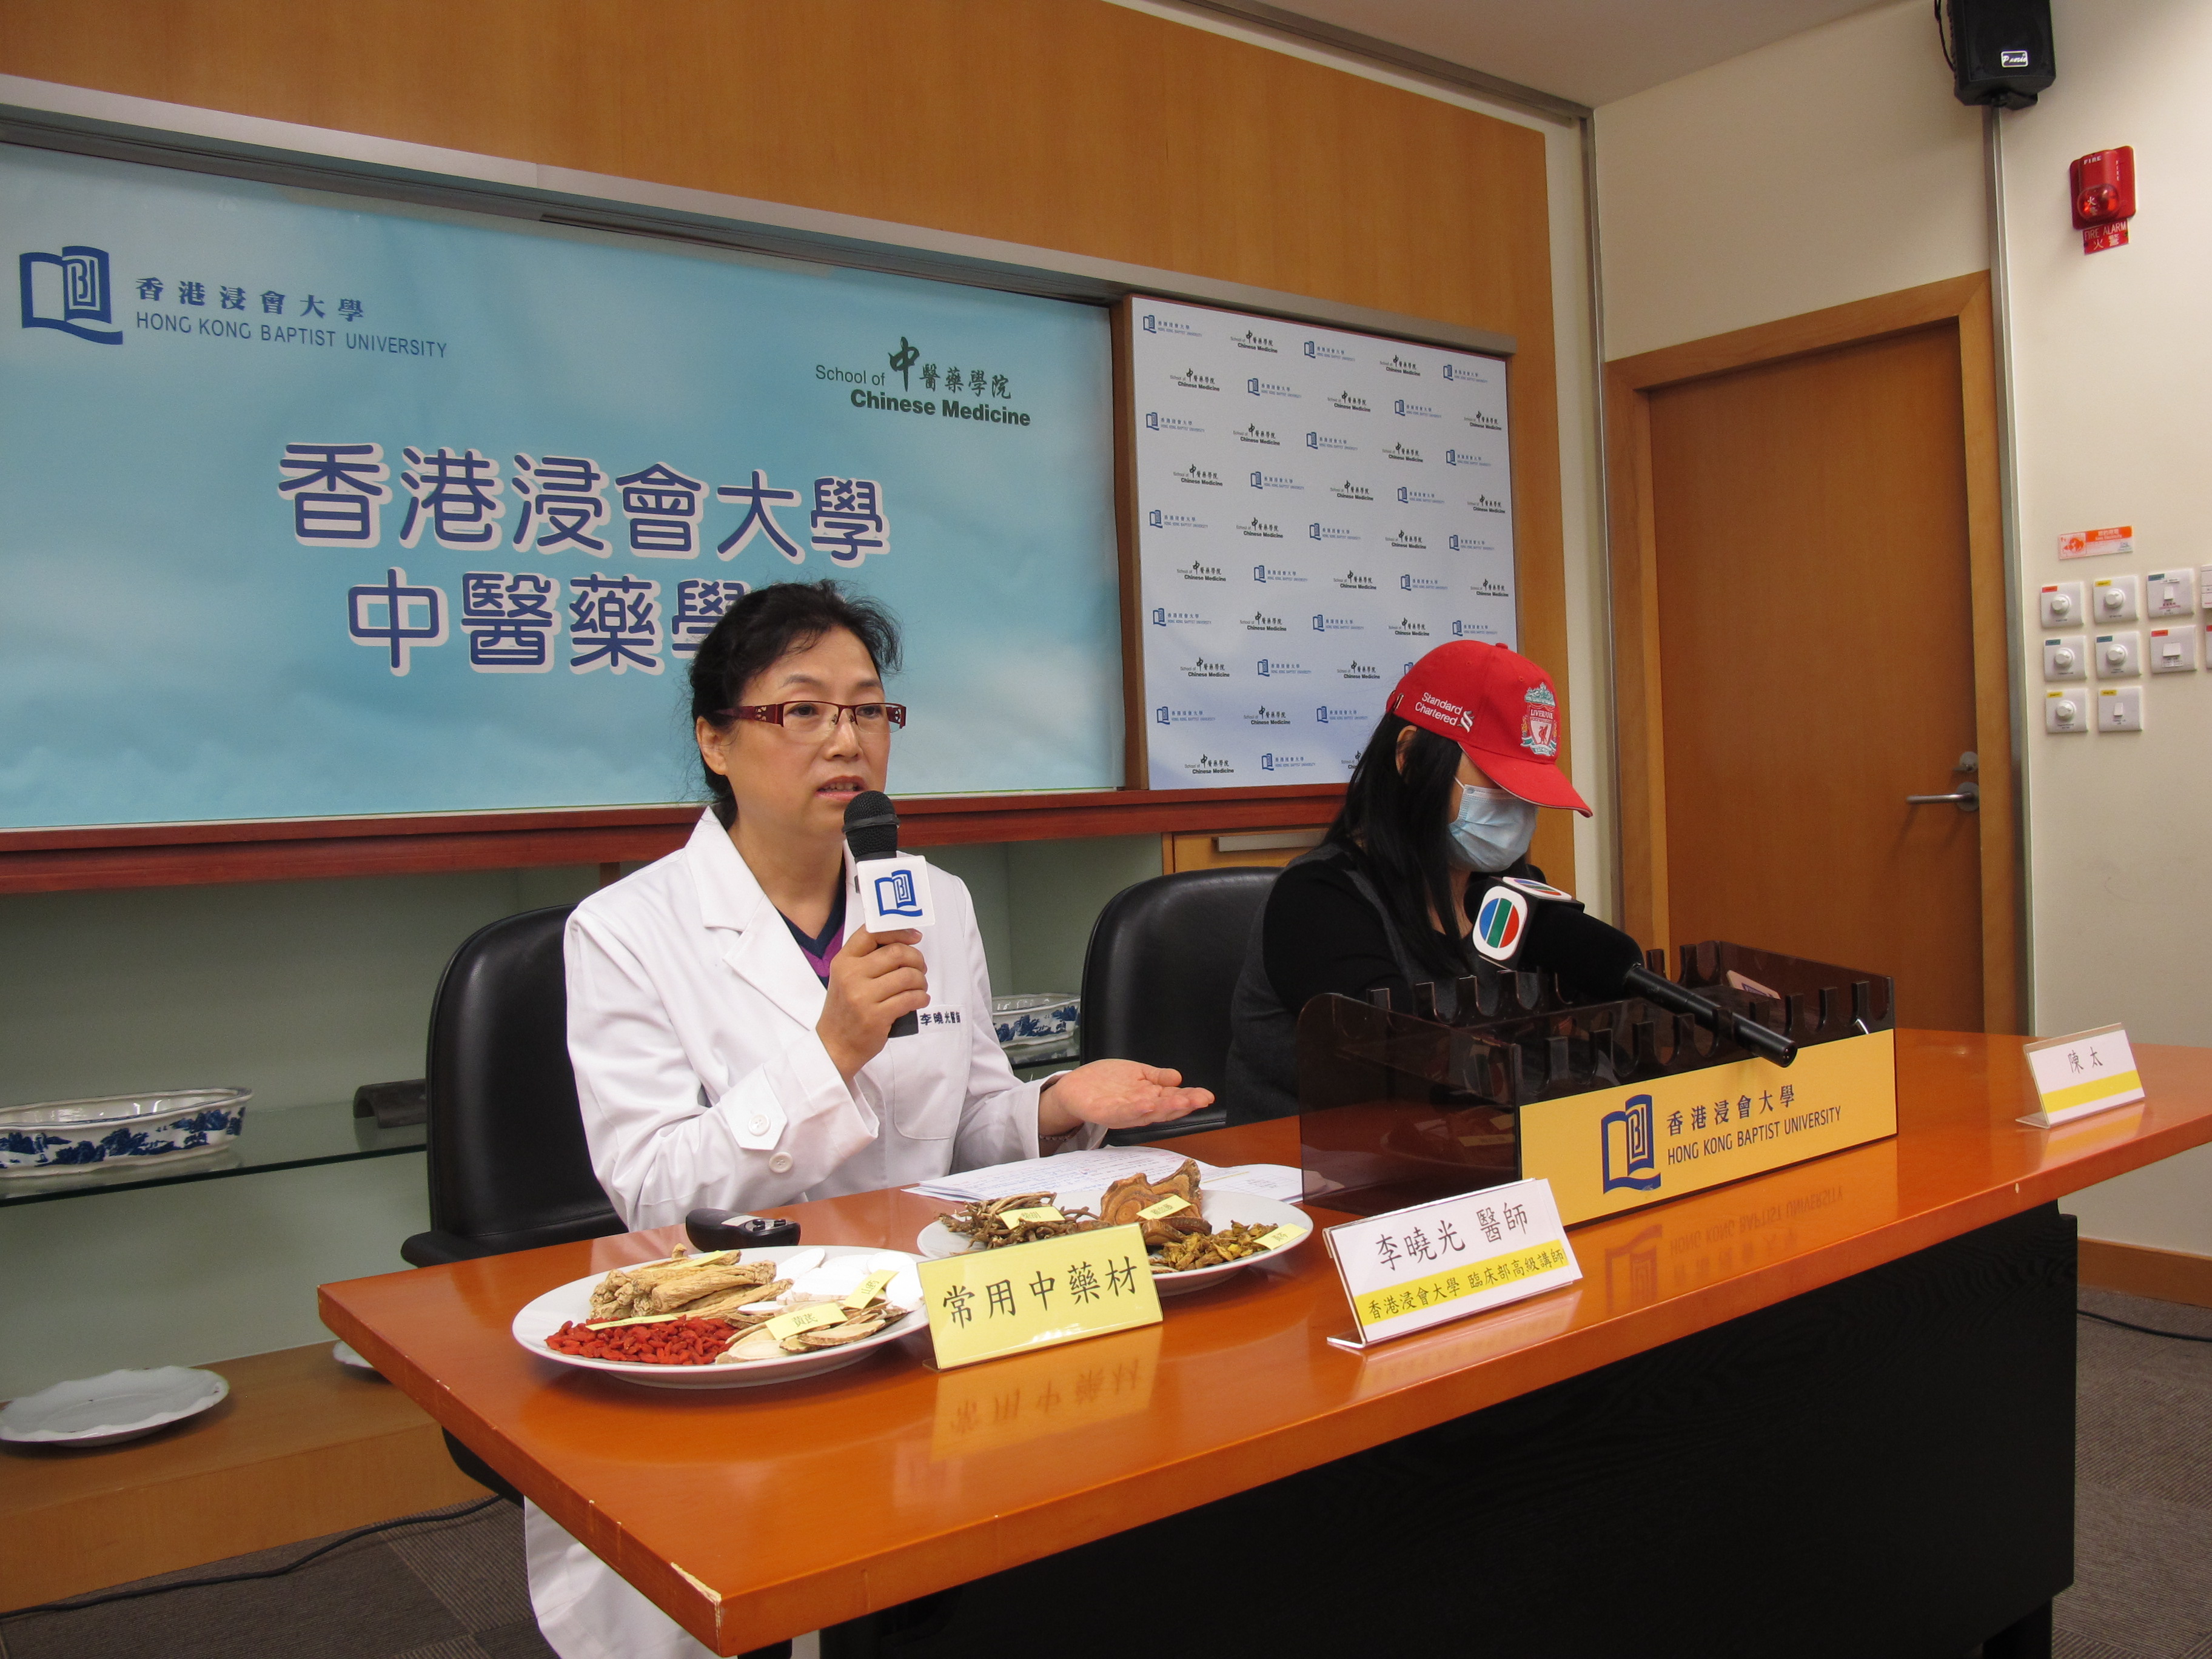 A pregnancy rate of 34.5% for female infertility treated with Chinese medicine in Hong Kong